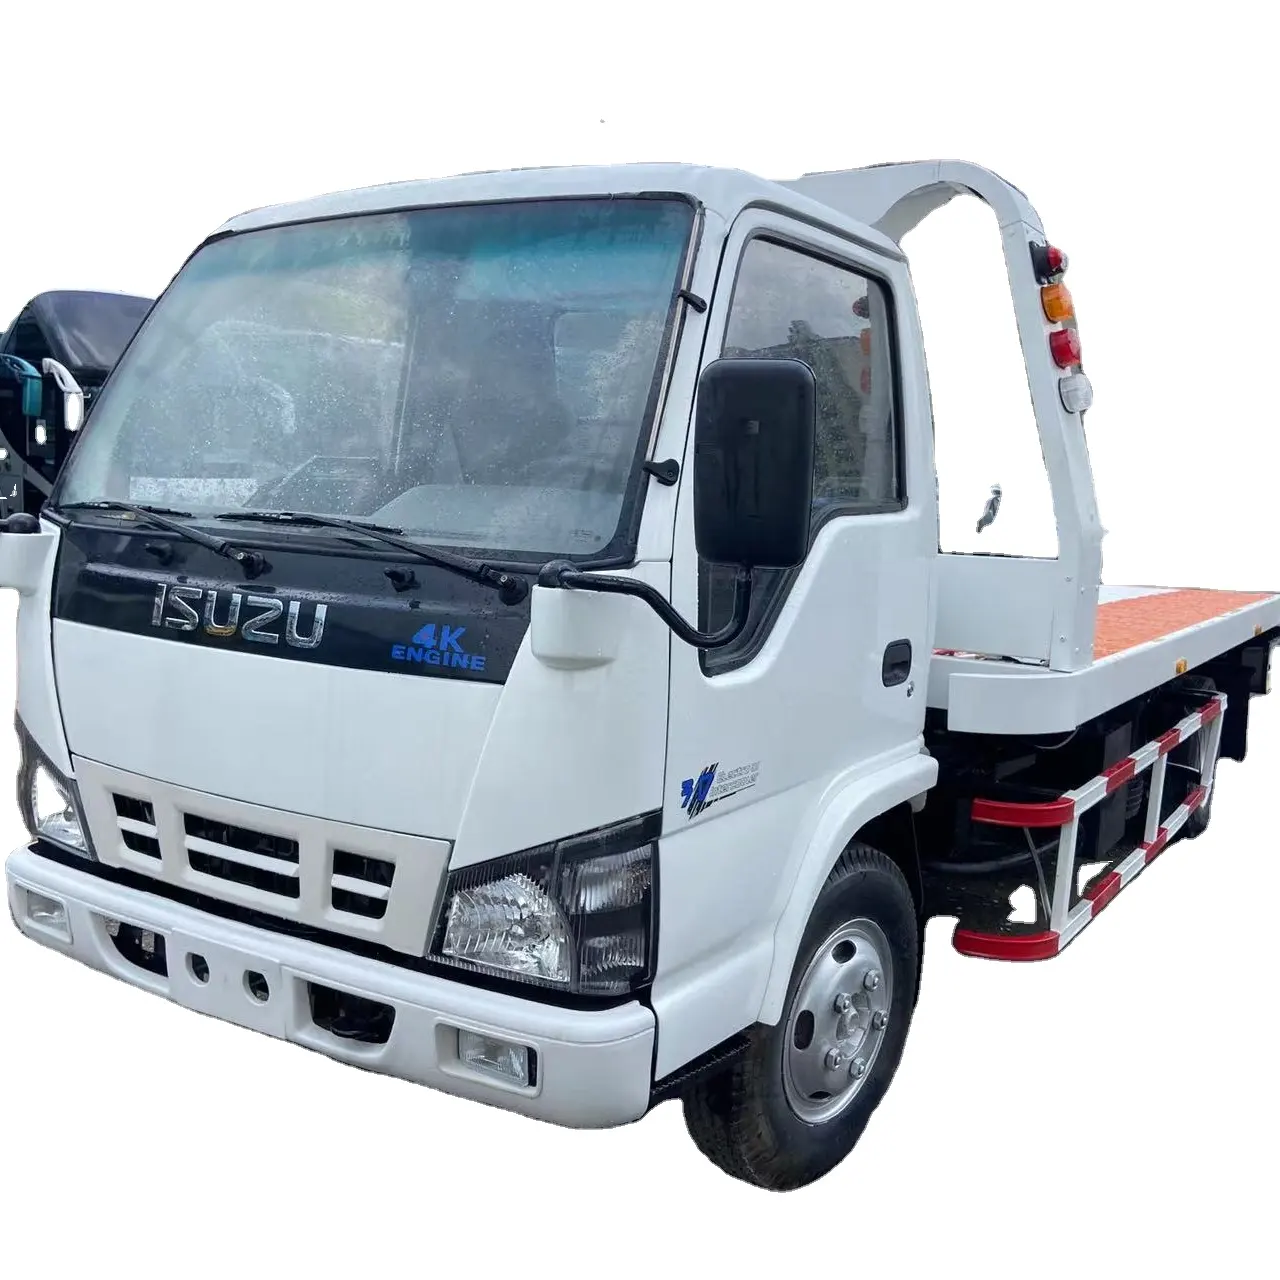 90% new ISUZUu wrecker truck 3 tons load capacity rescue truck with new platform system bed for sale